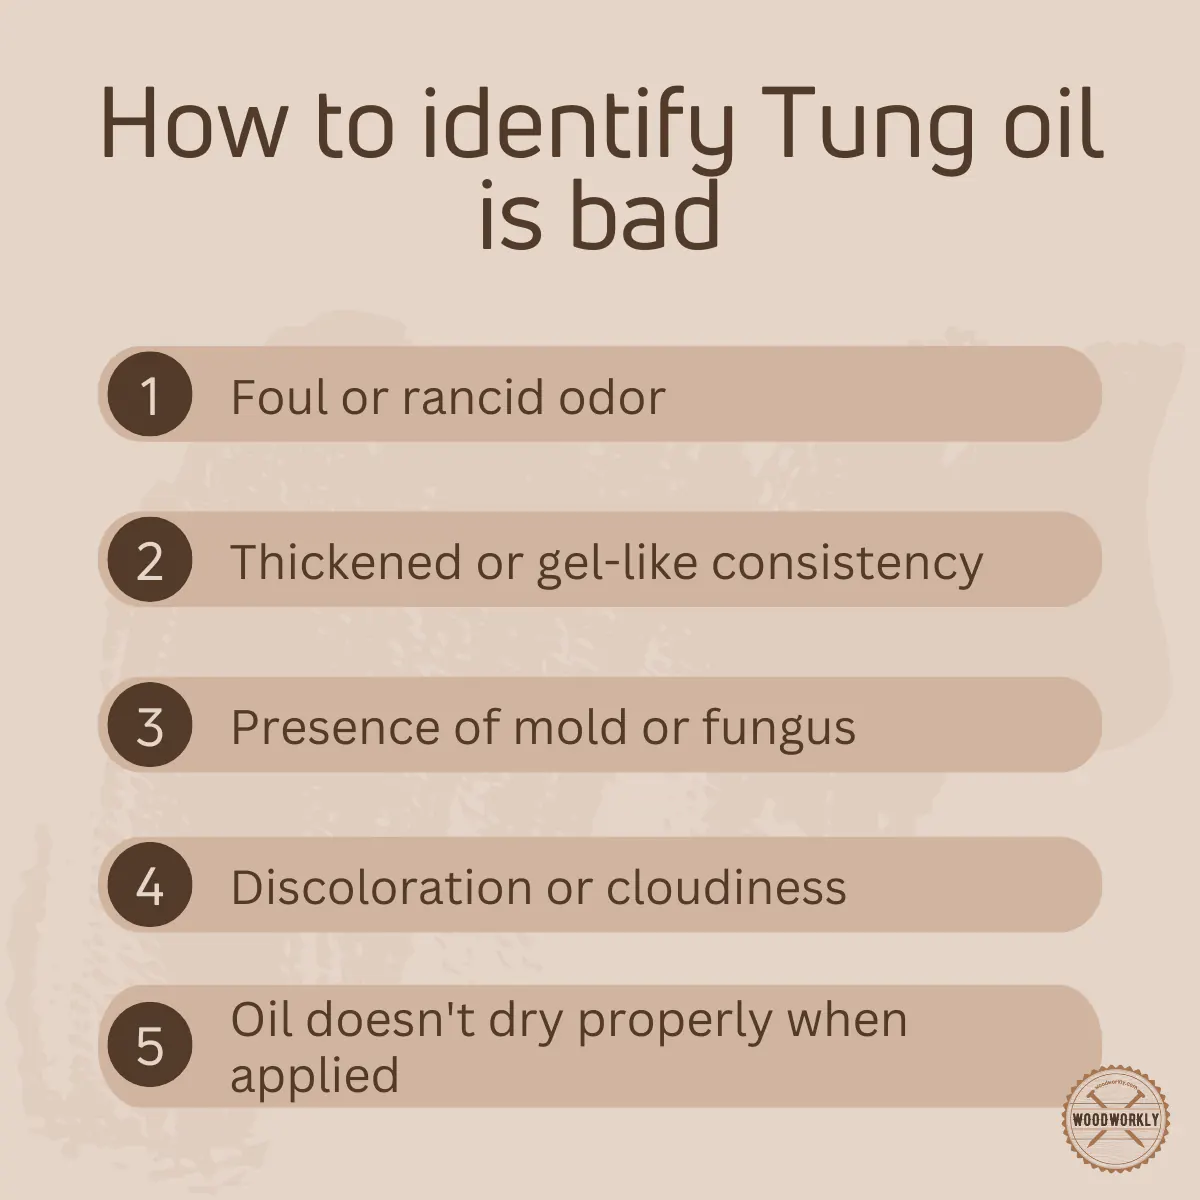 How to identify Tung oil is bad